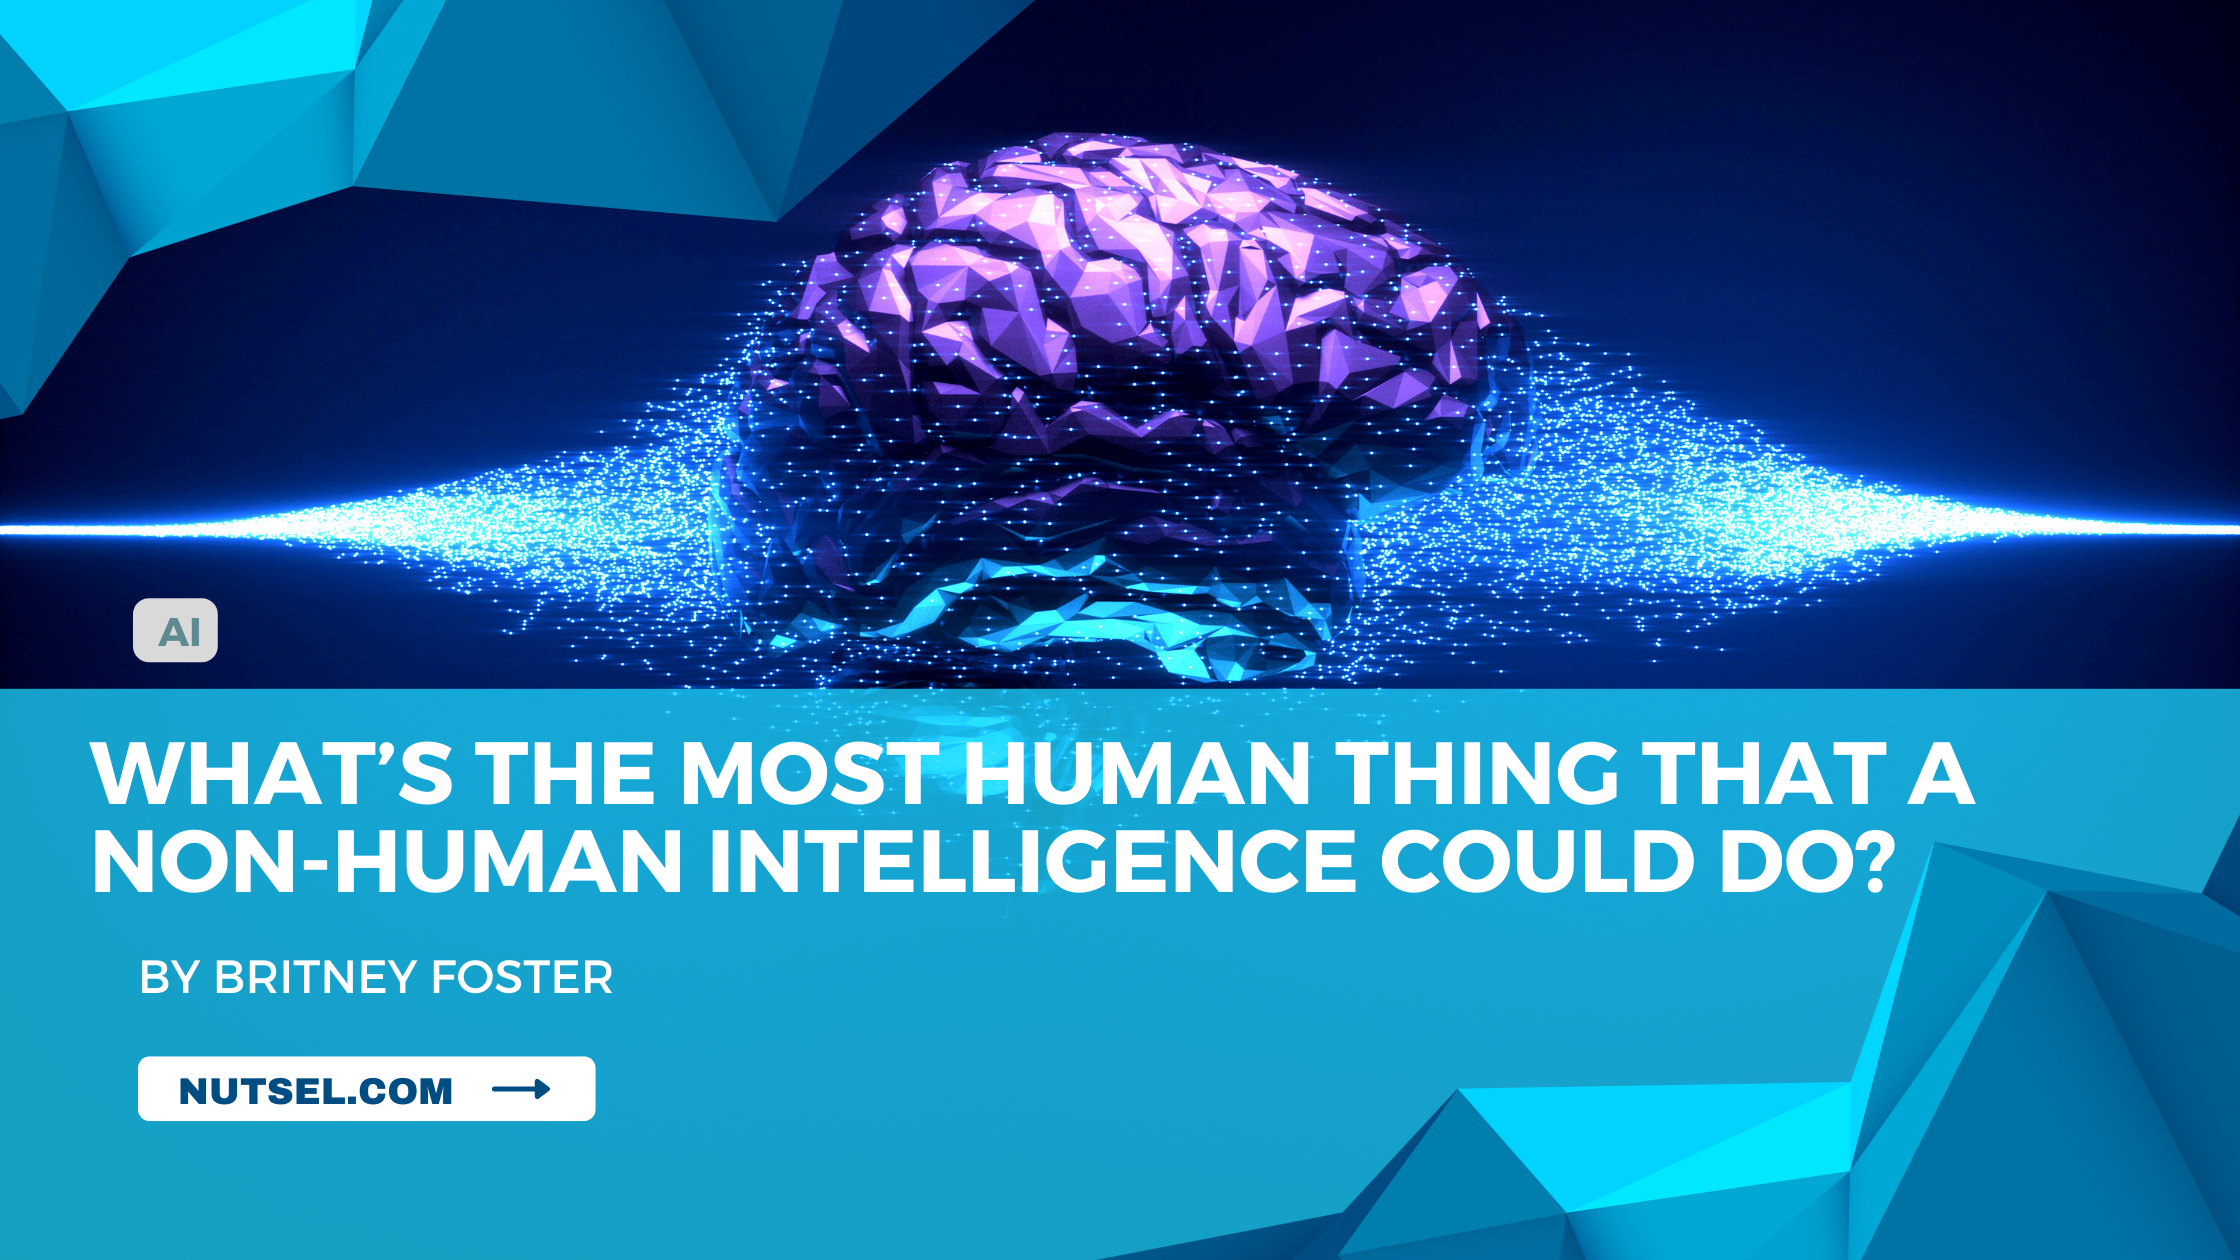 What’s the most human thing that a non-human intelligence could do?